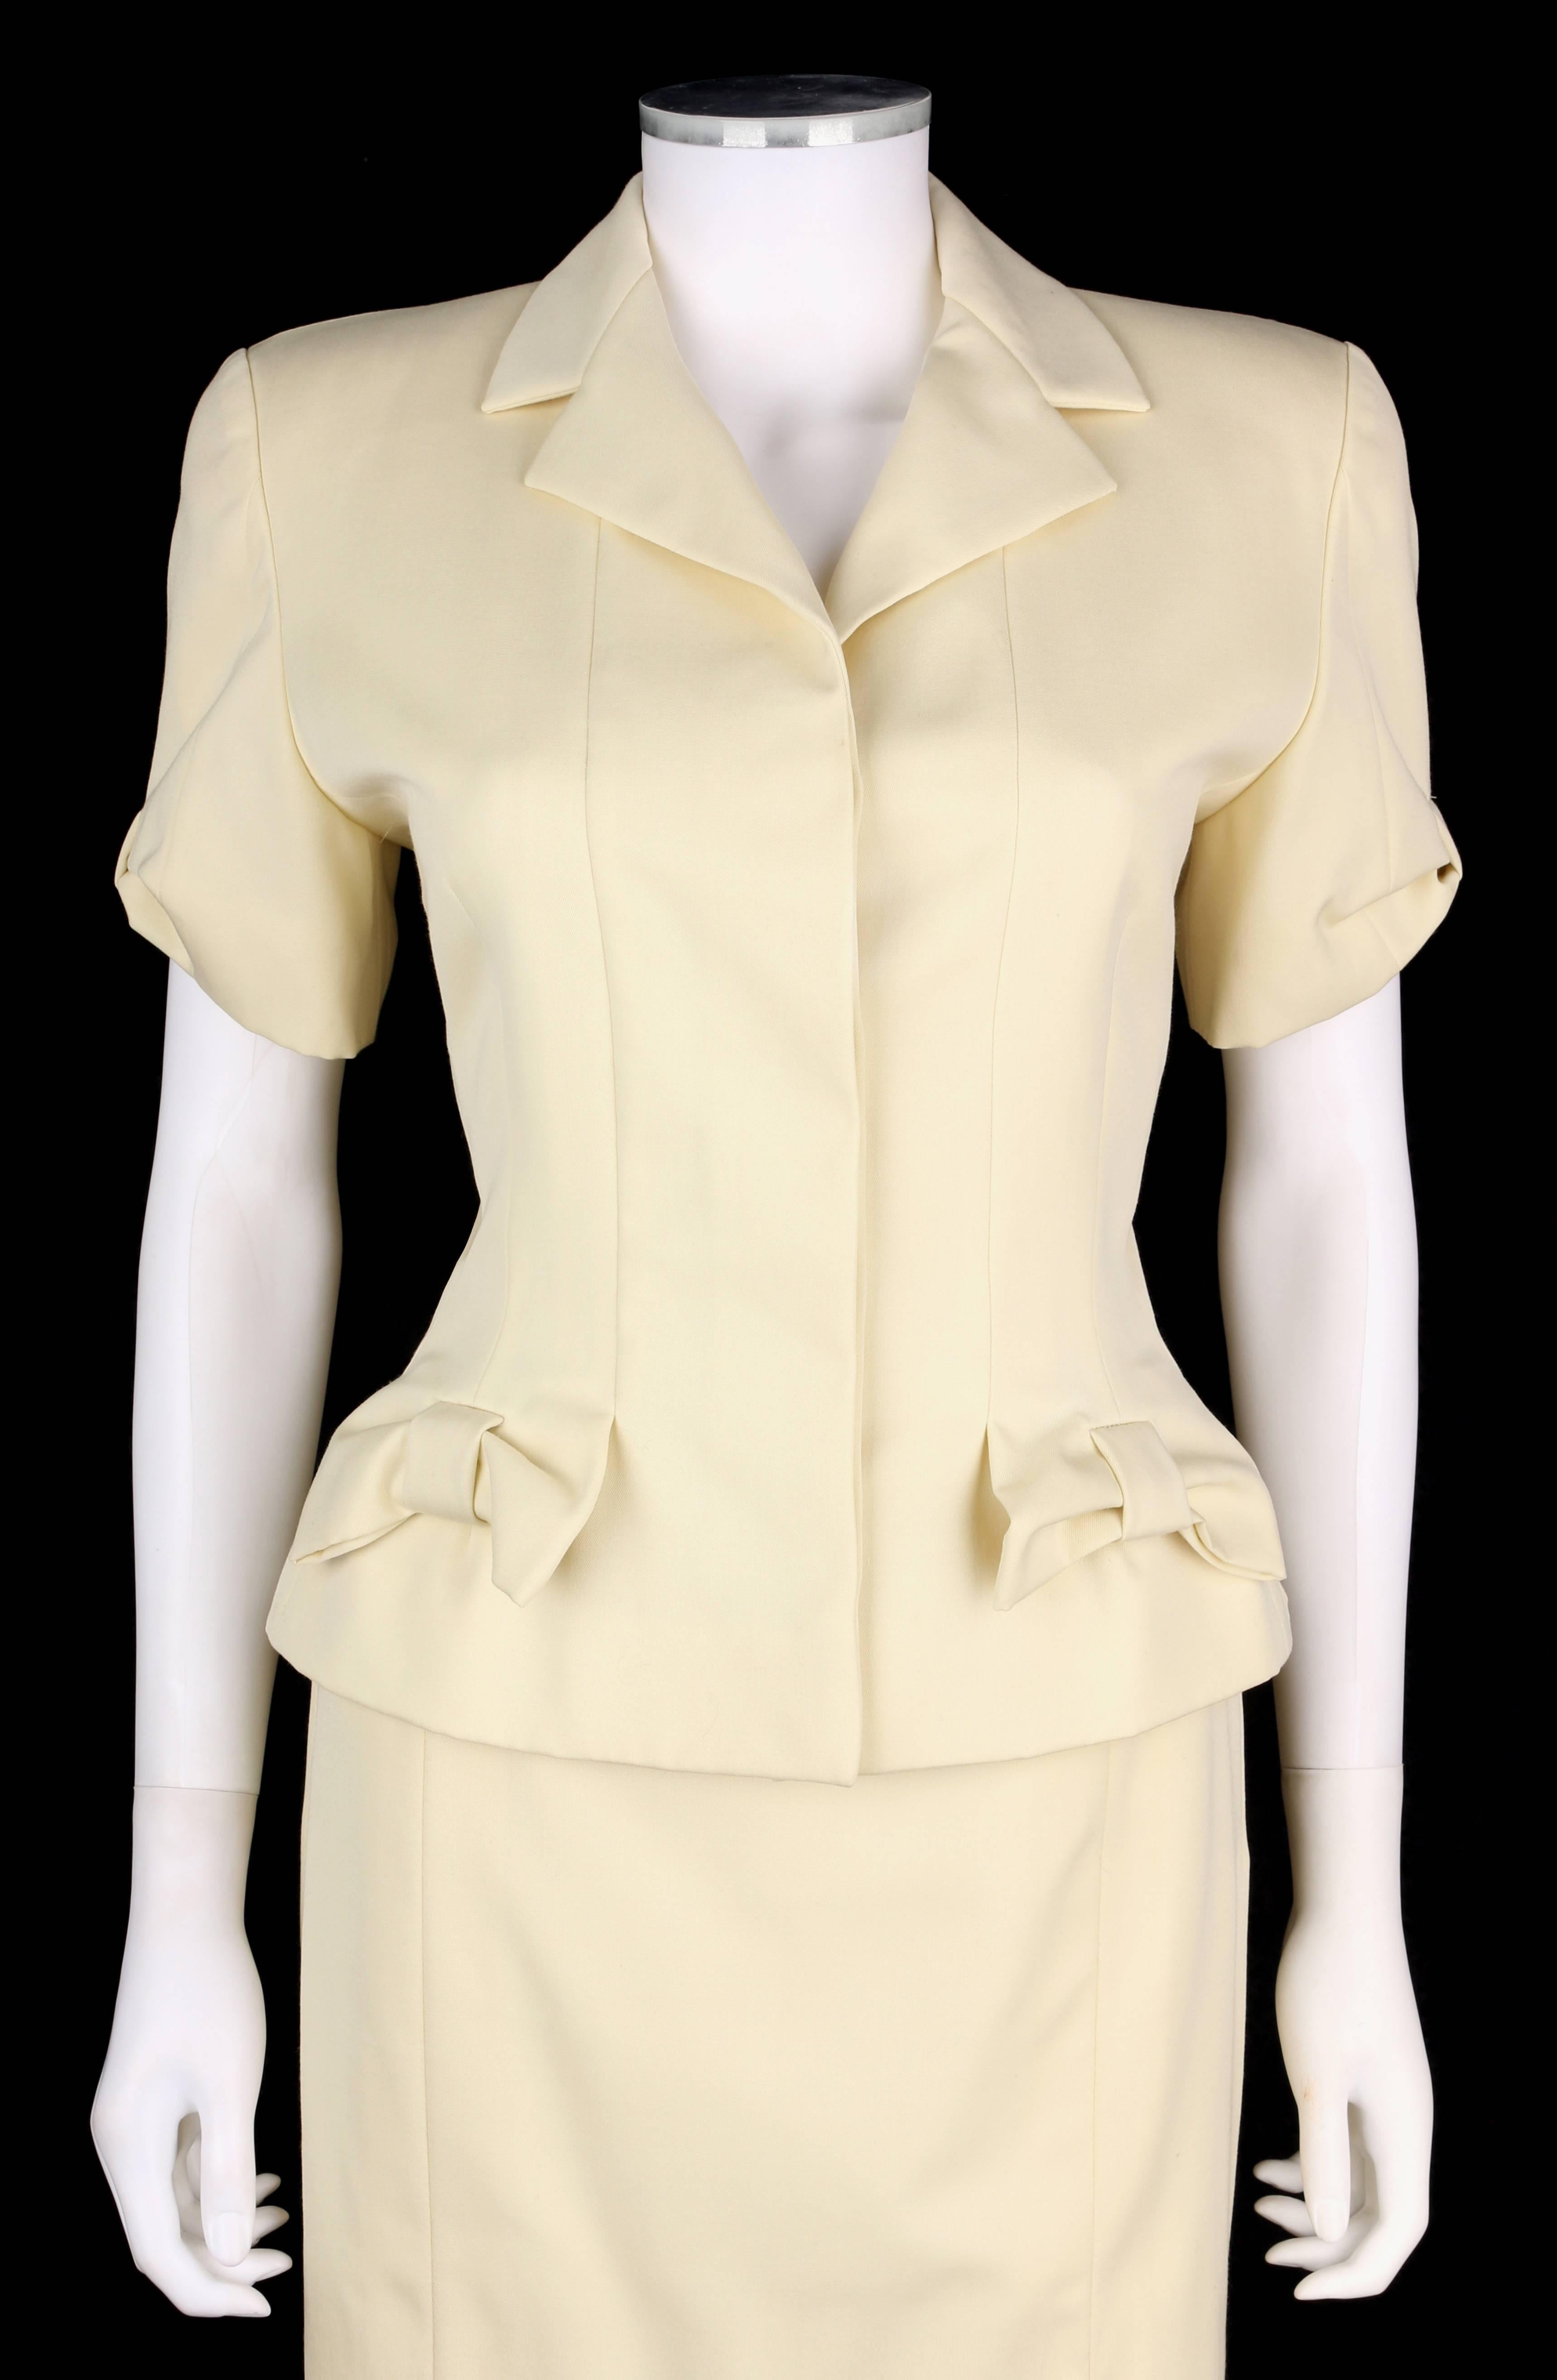 Vintage Givenchy (designed by John Galliano for the S/S/1996 Collection) 2 piece cream / light yellow blazer skirt set.  Blazer has notched lapel collar. Bow-like gathered details at front and cuffs. Matching covered four button closure front